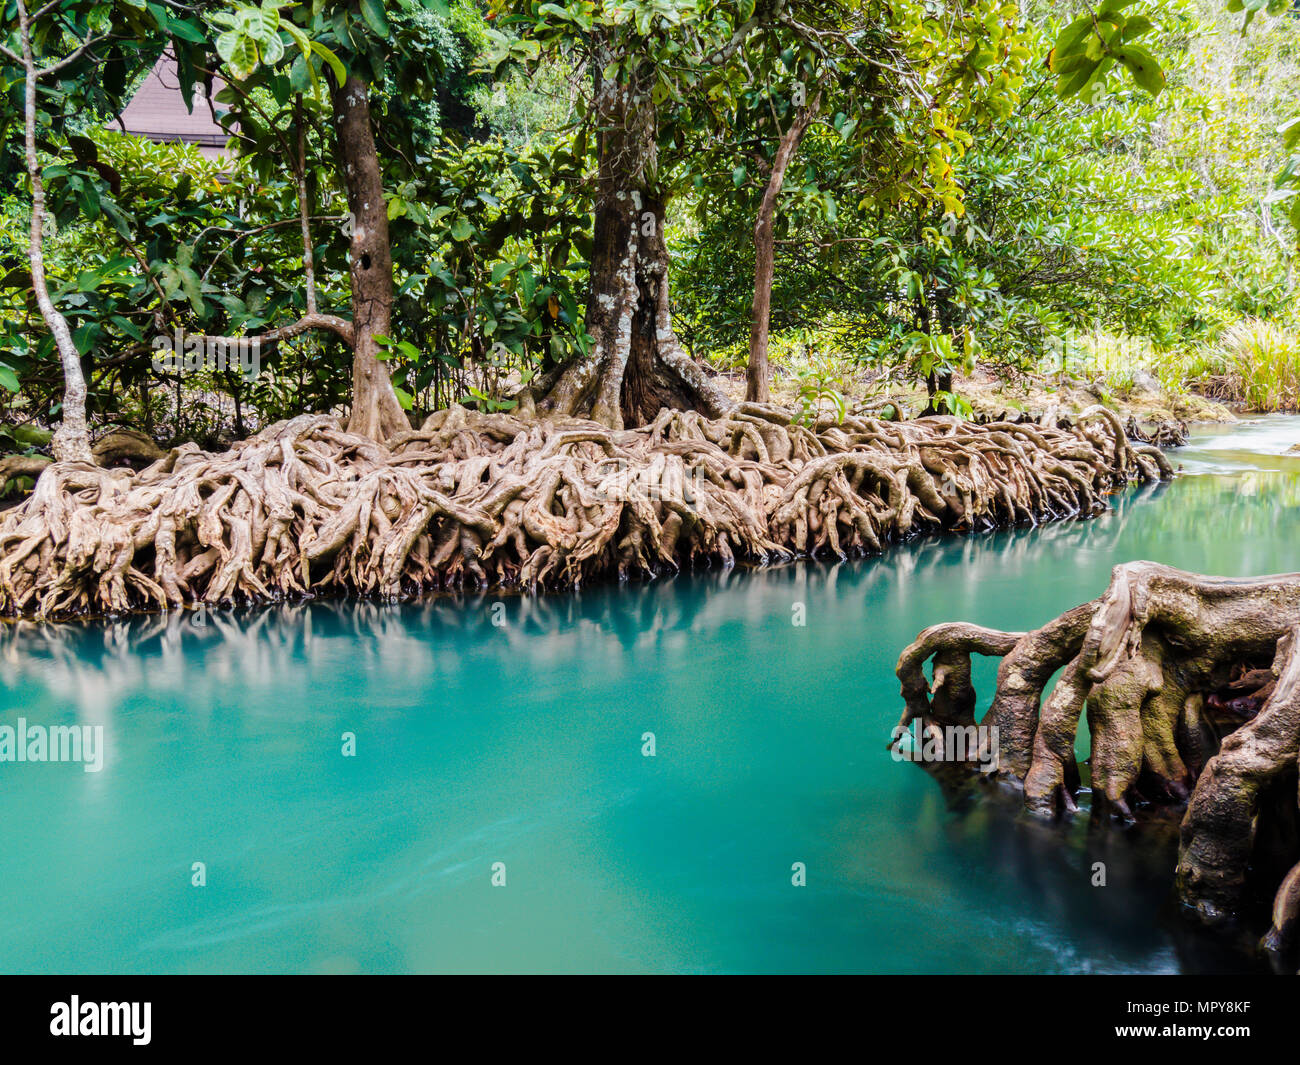 Scenic mangrove forest ecosystem with Mangrove roots and blue water at Krabi, Thailand. Stock Photo